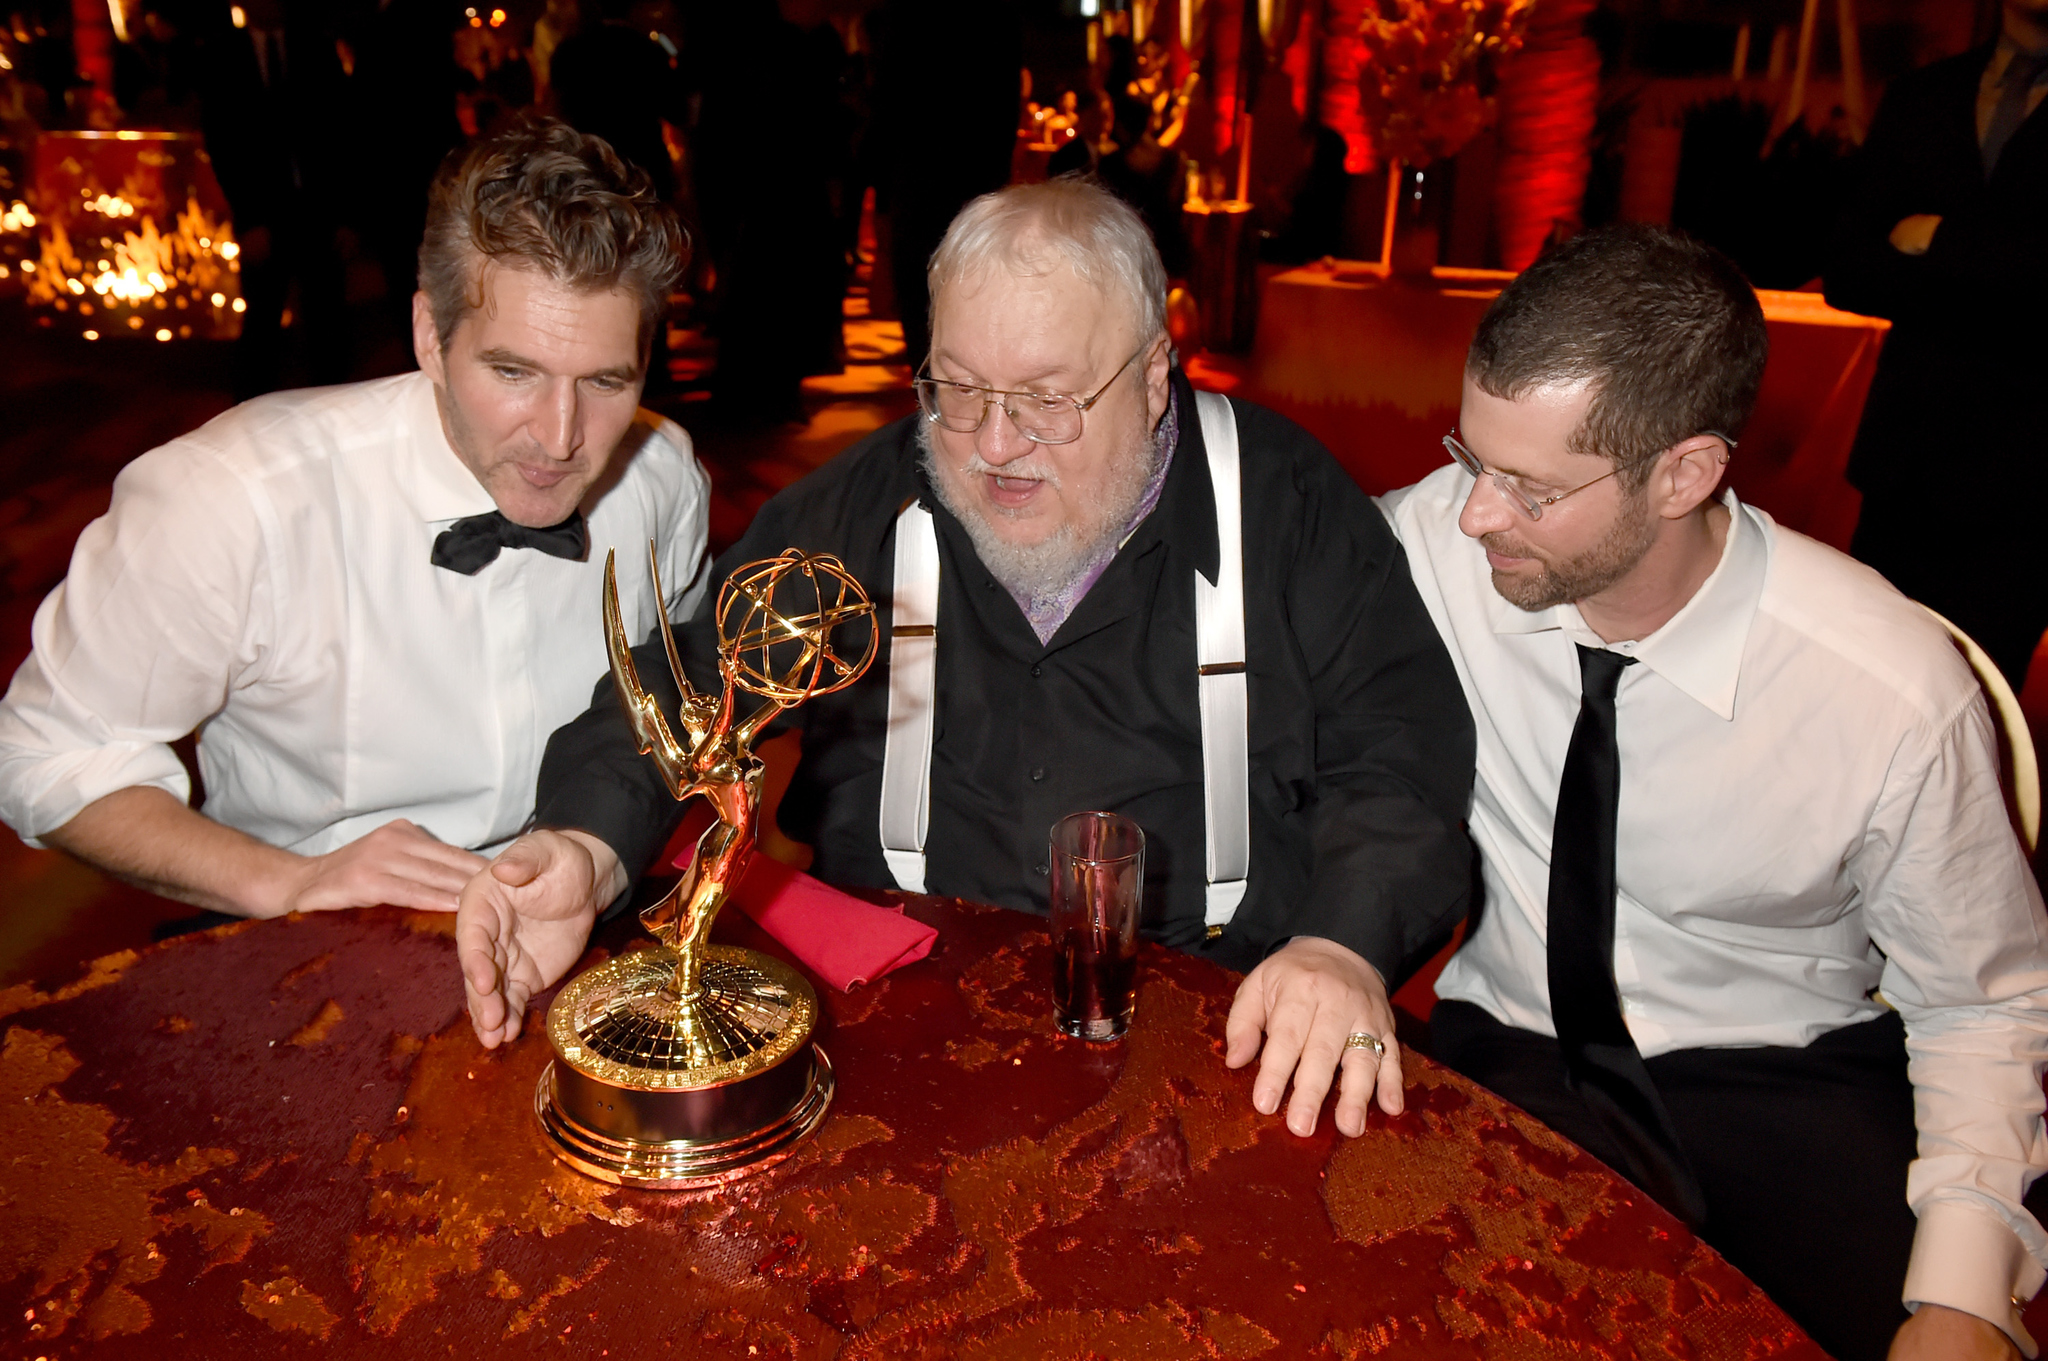 George R.R. Martin, David Benioff and D.B. Weiss at event of The 67th Primetime Emmy Awards (2015)